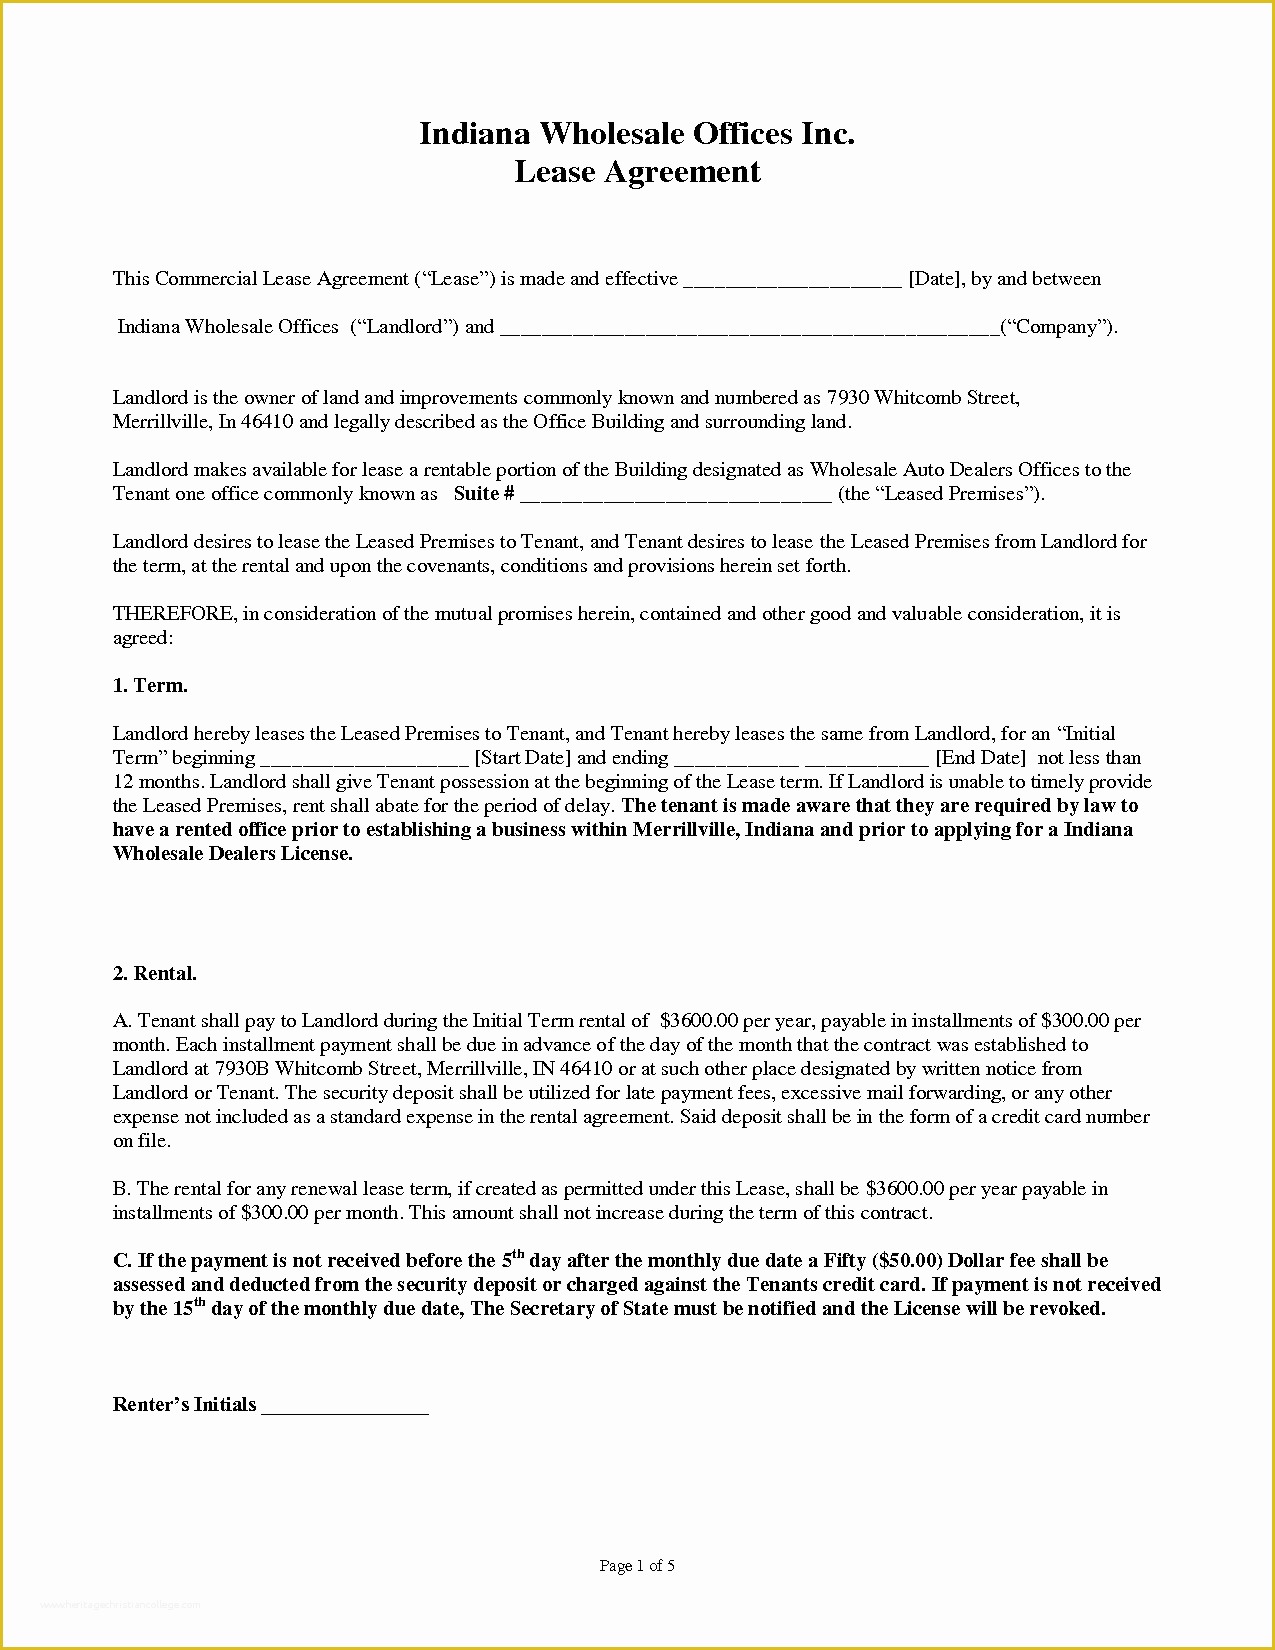 Building Lease Agreement Template Free Of 13 Mercial Lease Agreement Templates Excel Pdf formats